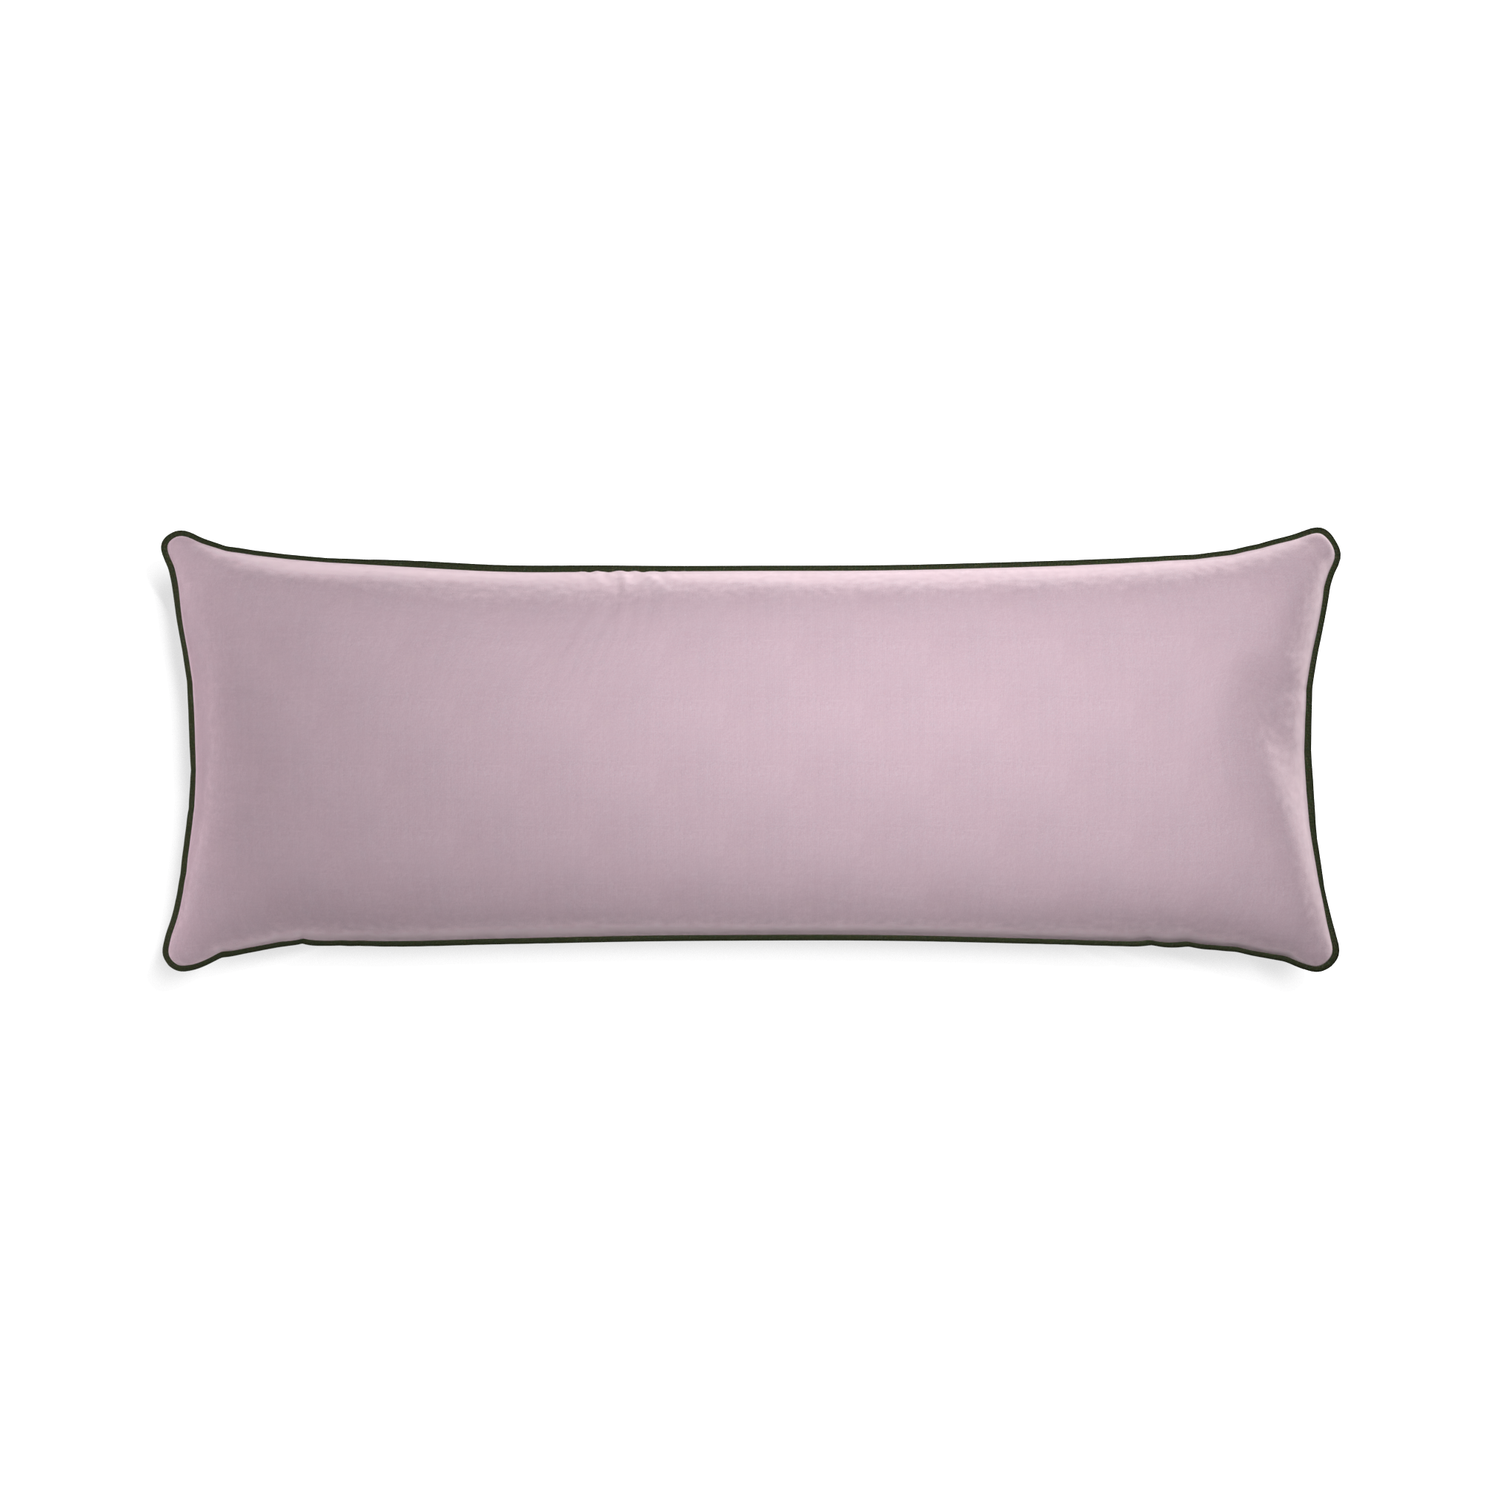 rectangle lilac velvet pillow with fern green piping